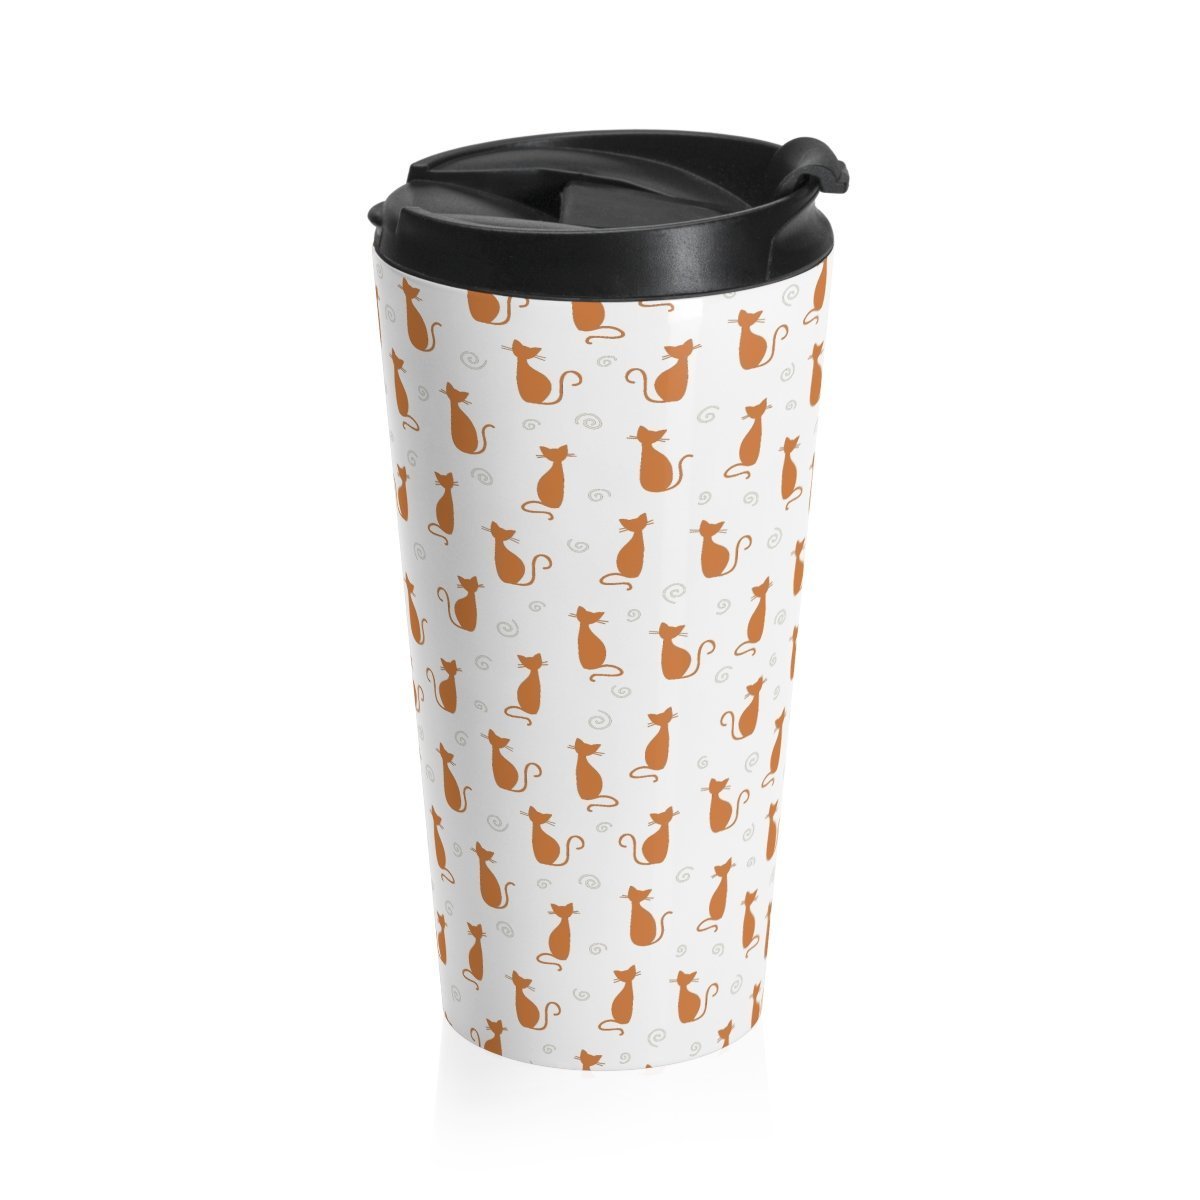 Perfect for cat lovers who have their coffee on the go, this cat print travel mug is cute and functional.